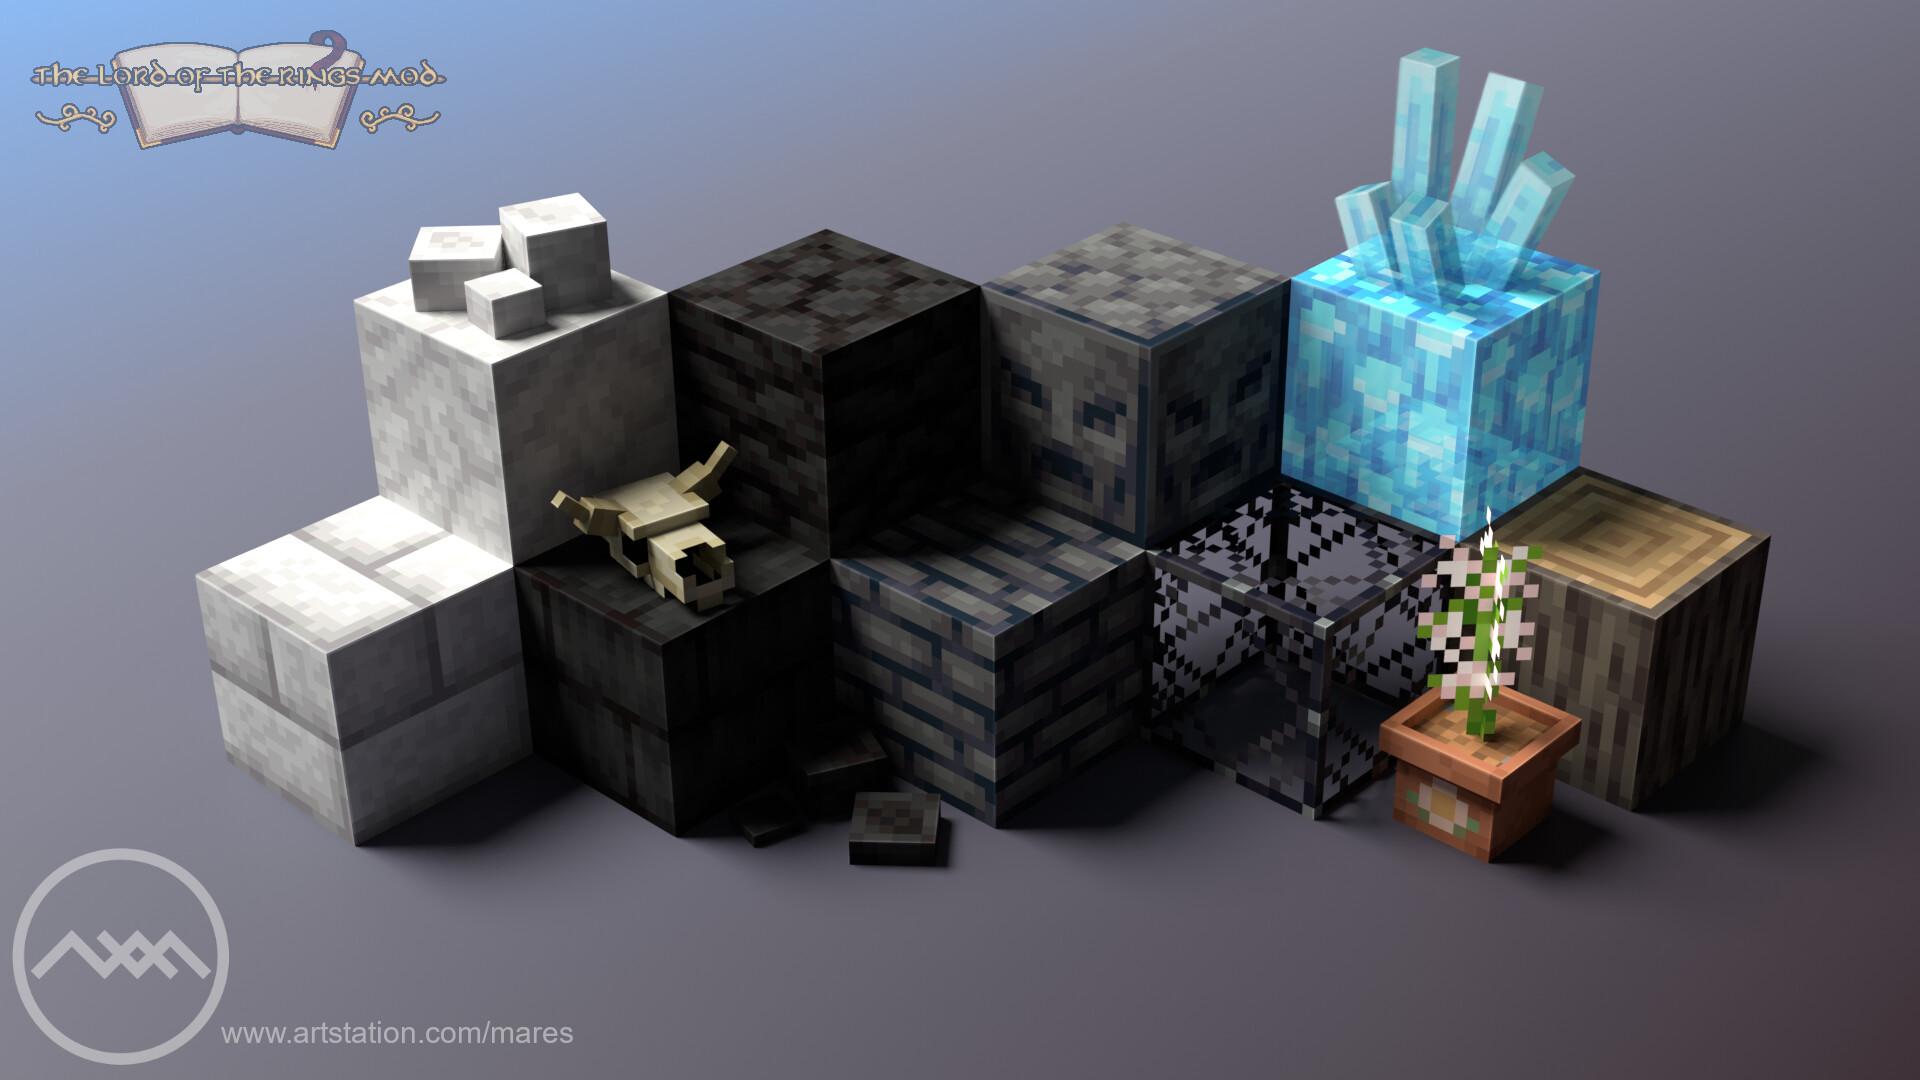 Design a digital minecraft texture or skin from blocks to you by  Thedarklord409